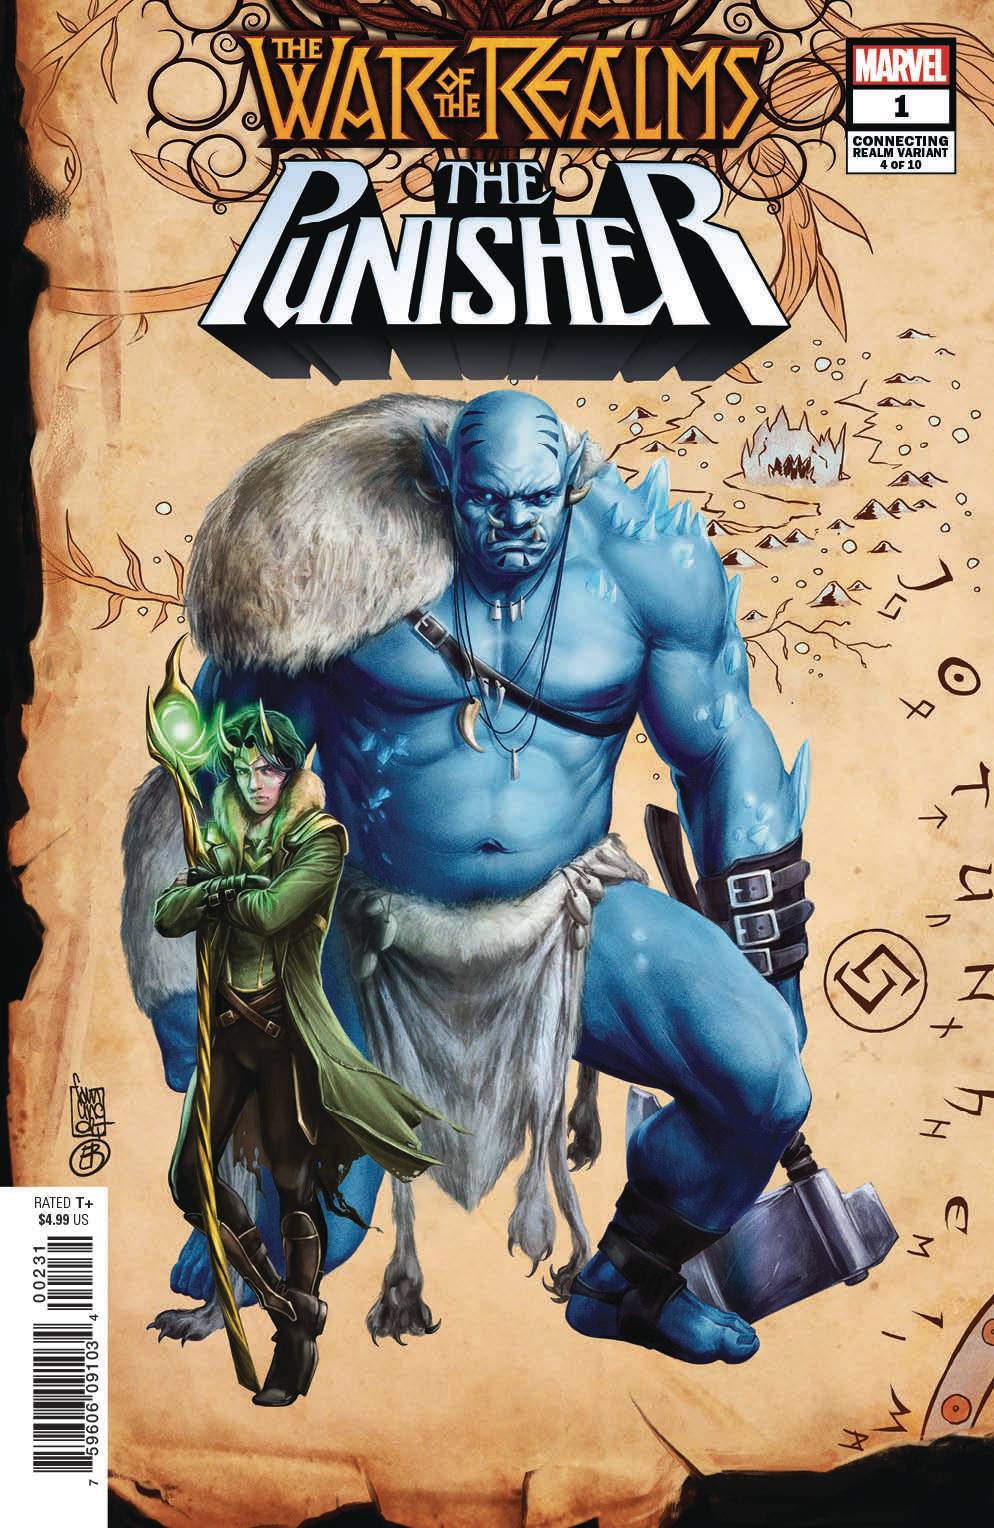 WAR OF REALMS PUNISHER #1 (OF 3) CAMUNCOLI CONNECTING REALM 04/17/19 FOC 03/25/19